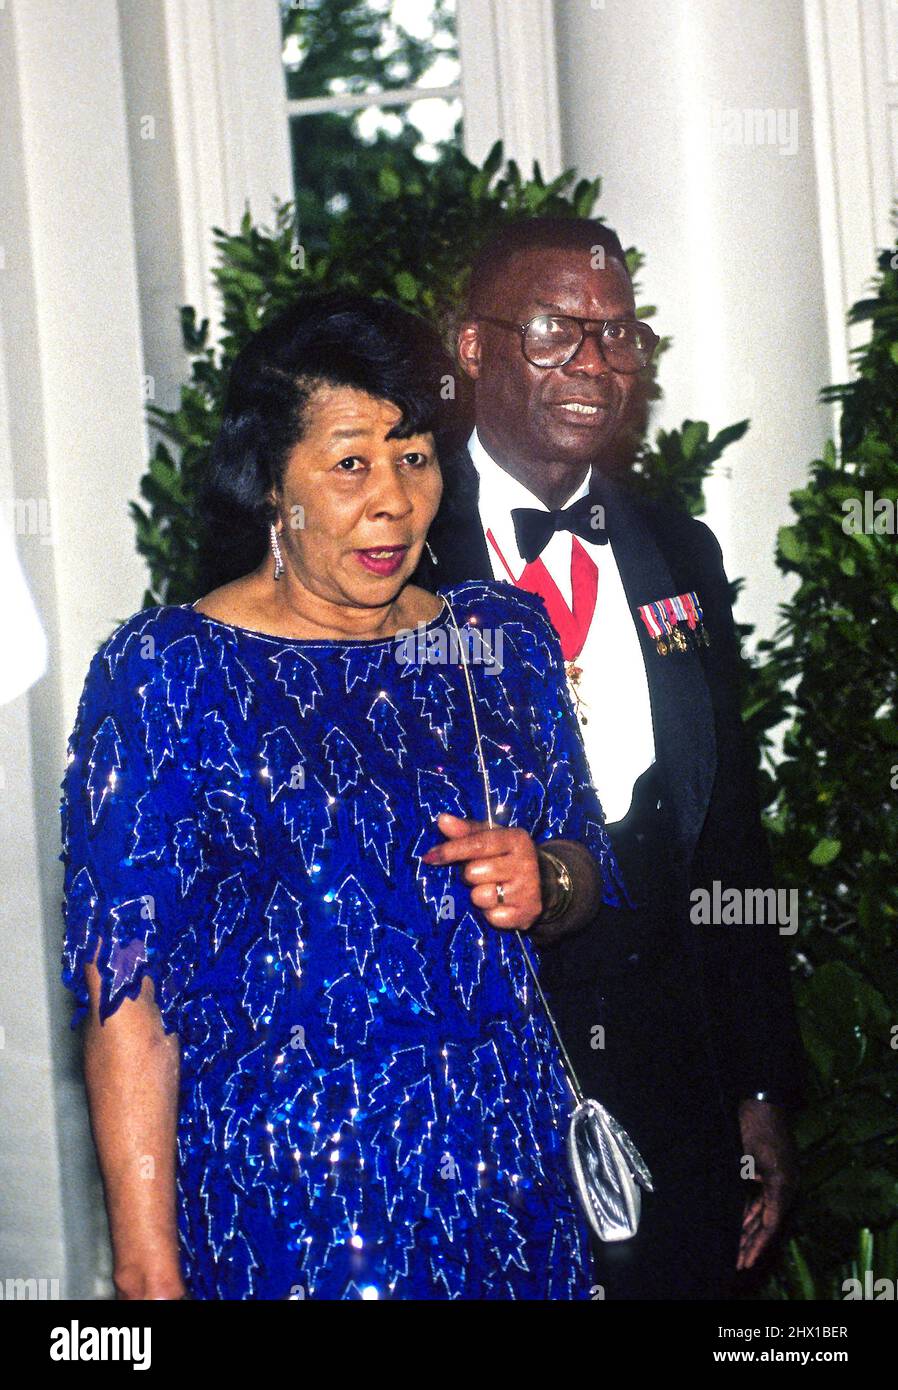 President of Prairie View A&M University and former FEMA Director, United States Army Lieutenant General (Retired) Julius W. Becton, Jr and his wife, Louise, arrive at the White House in Washington, DC for the State Dinner honoring Queen Elizabeth II on May 14, 1991.Credit: Ron Sachs / CNP /MediaPunch Stock Photo